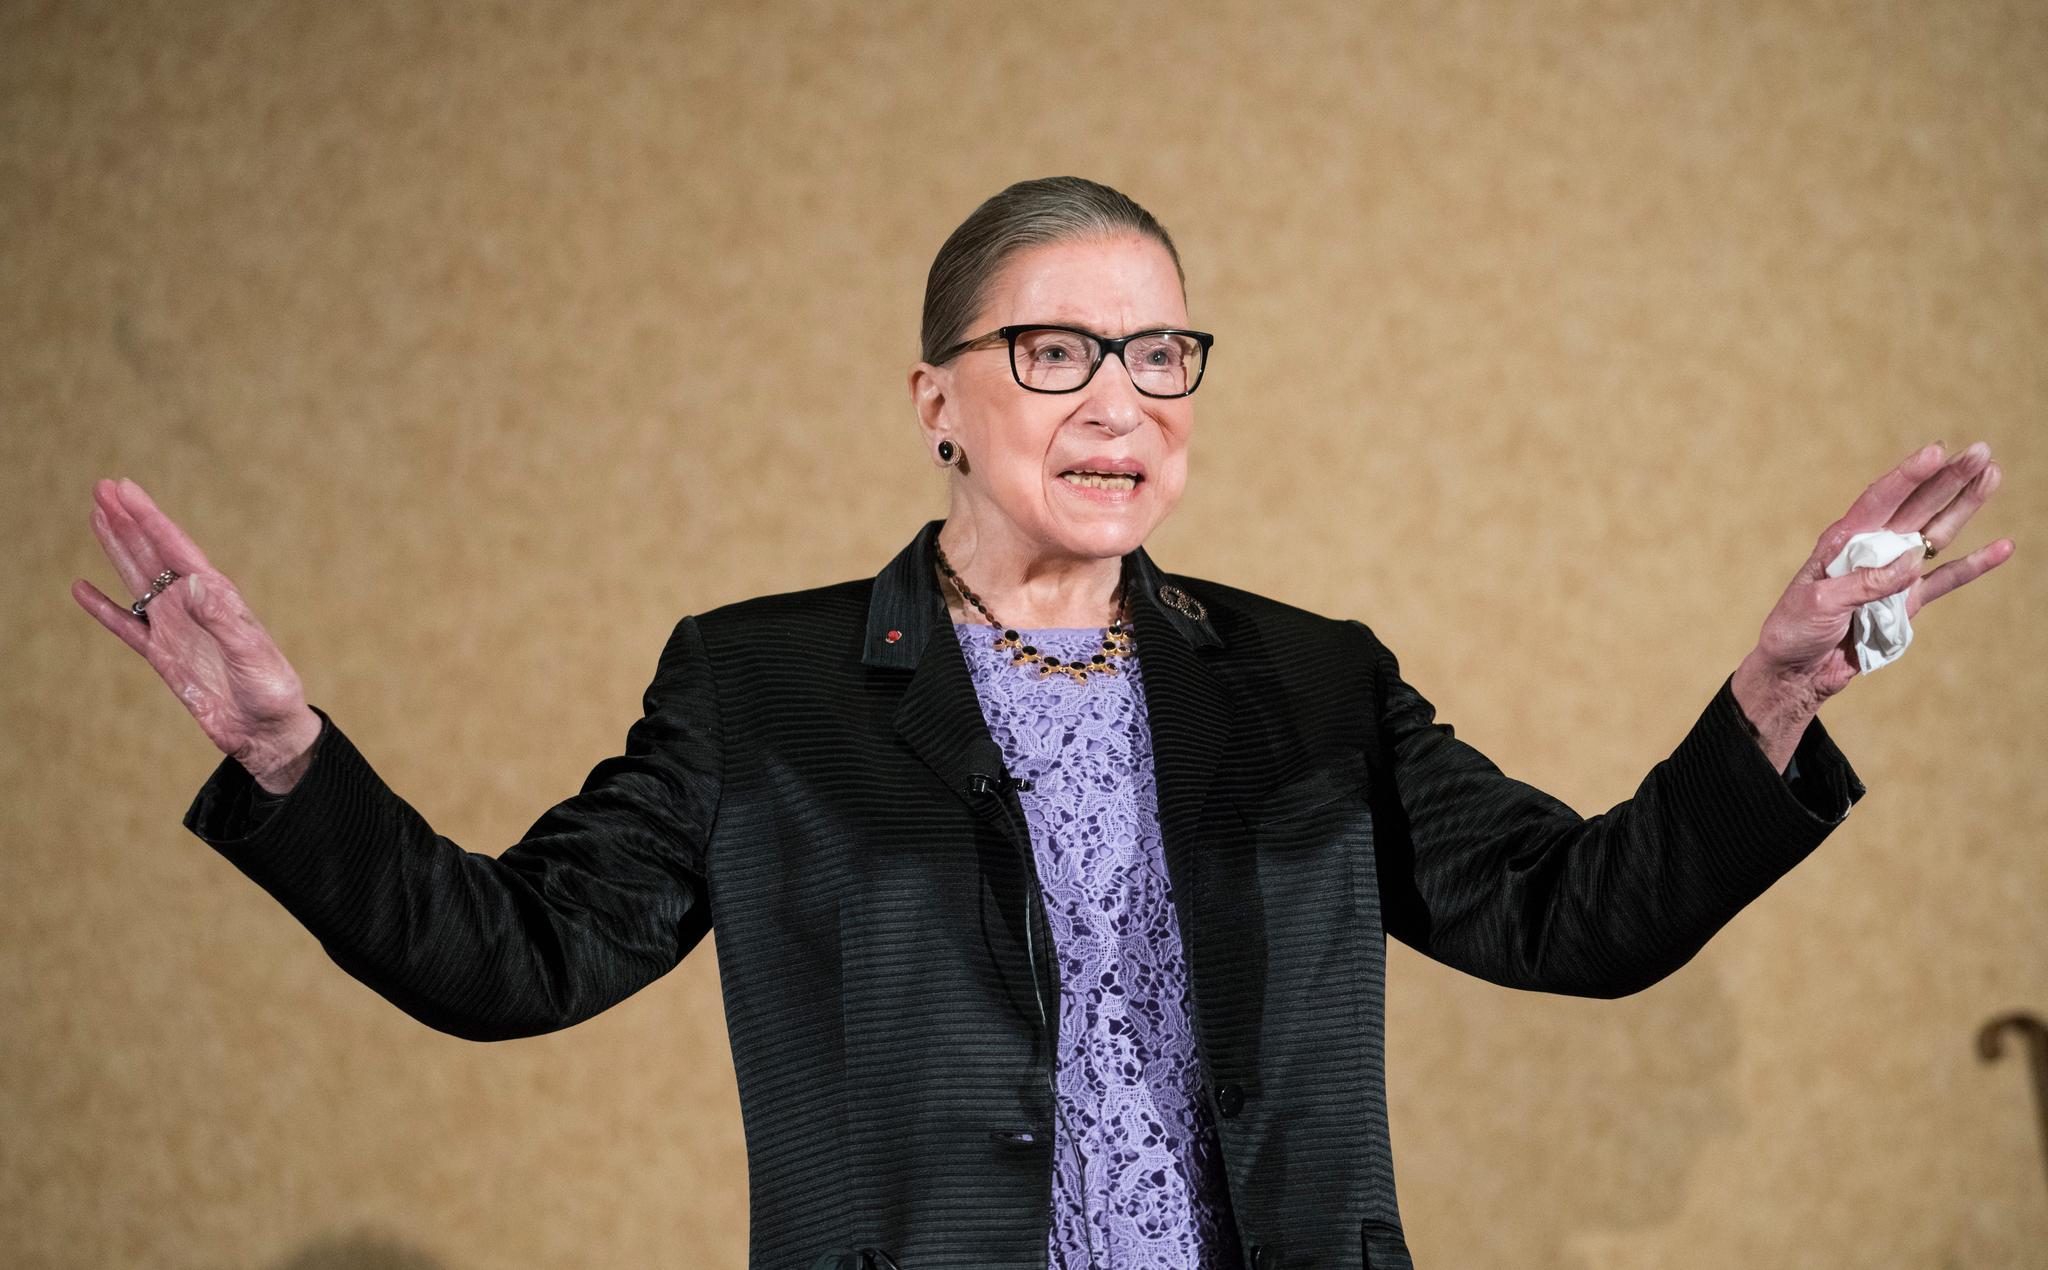 Ginsburg has completed radiation therapy for the cancerous tumor